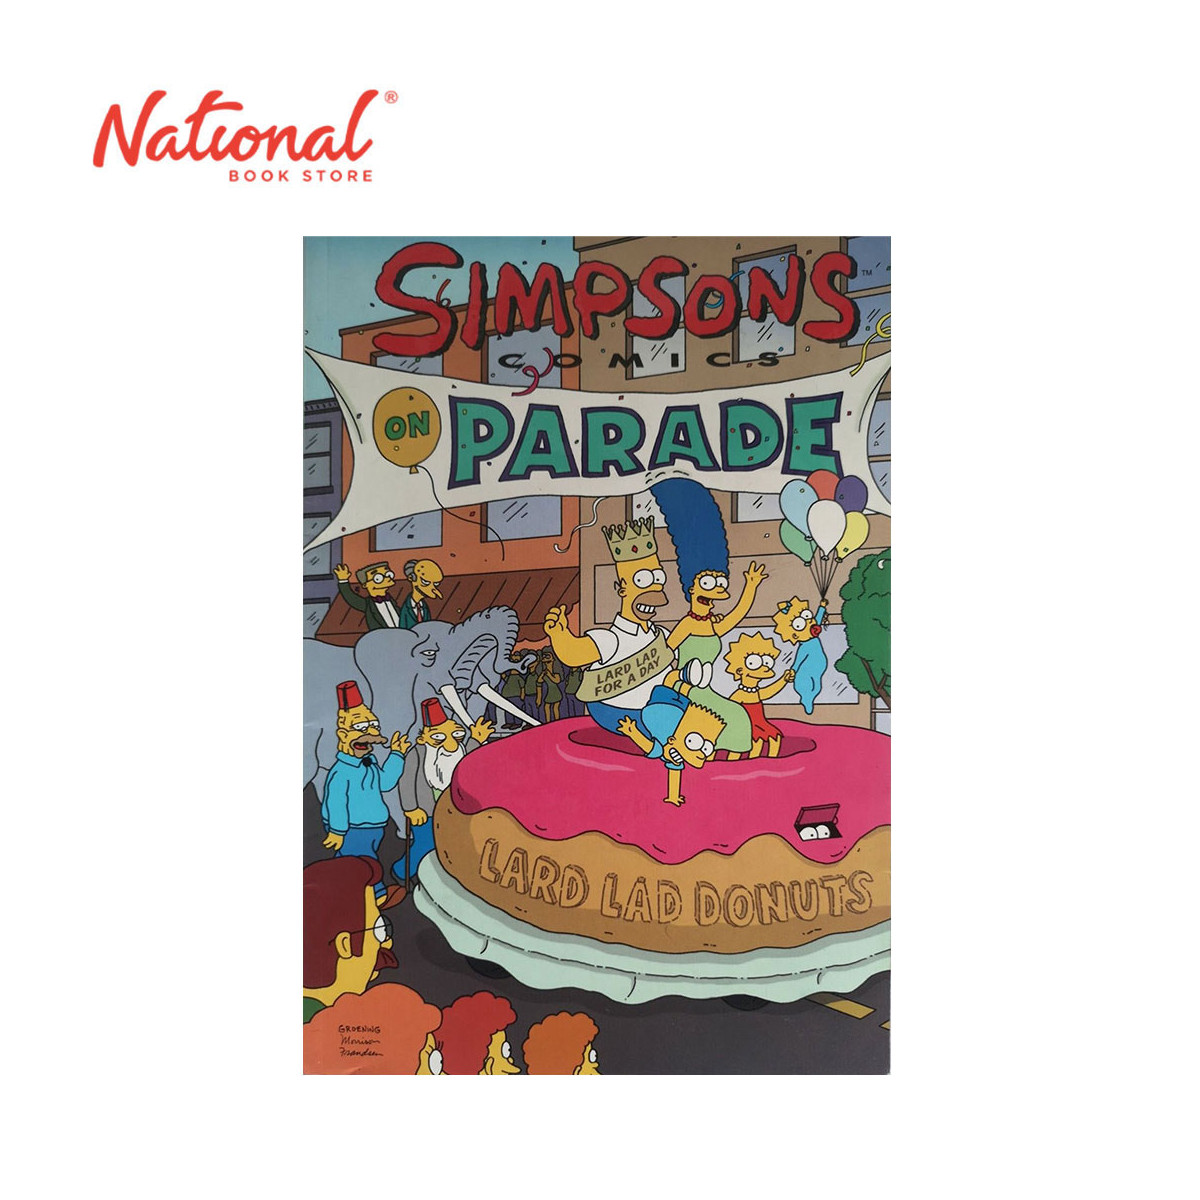 Simpsons Comics: On Parade by Matt Groening - Trade Paperback - Graphic Novels